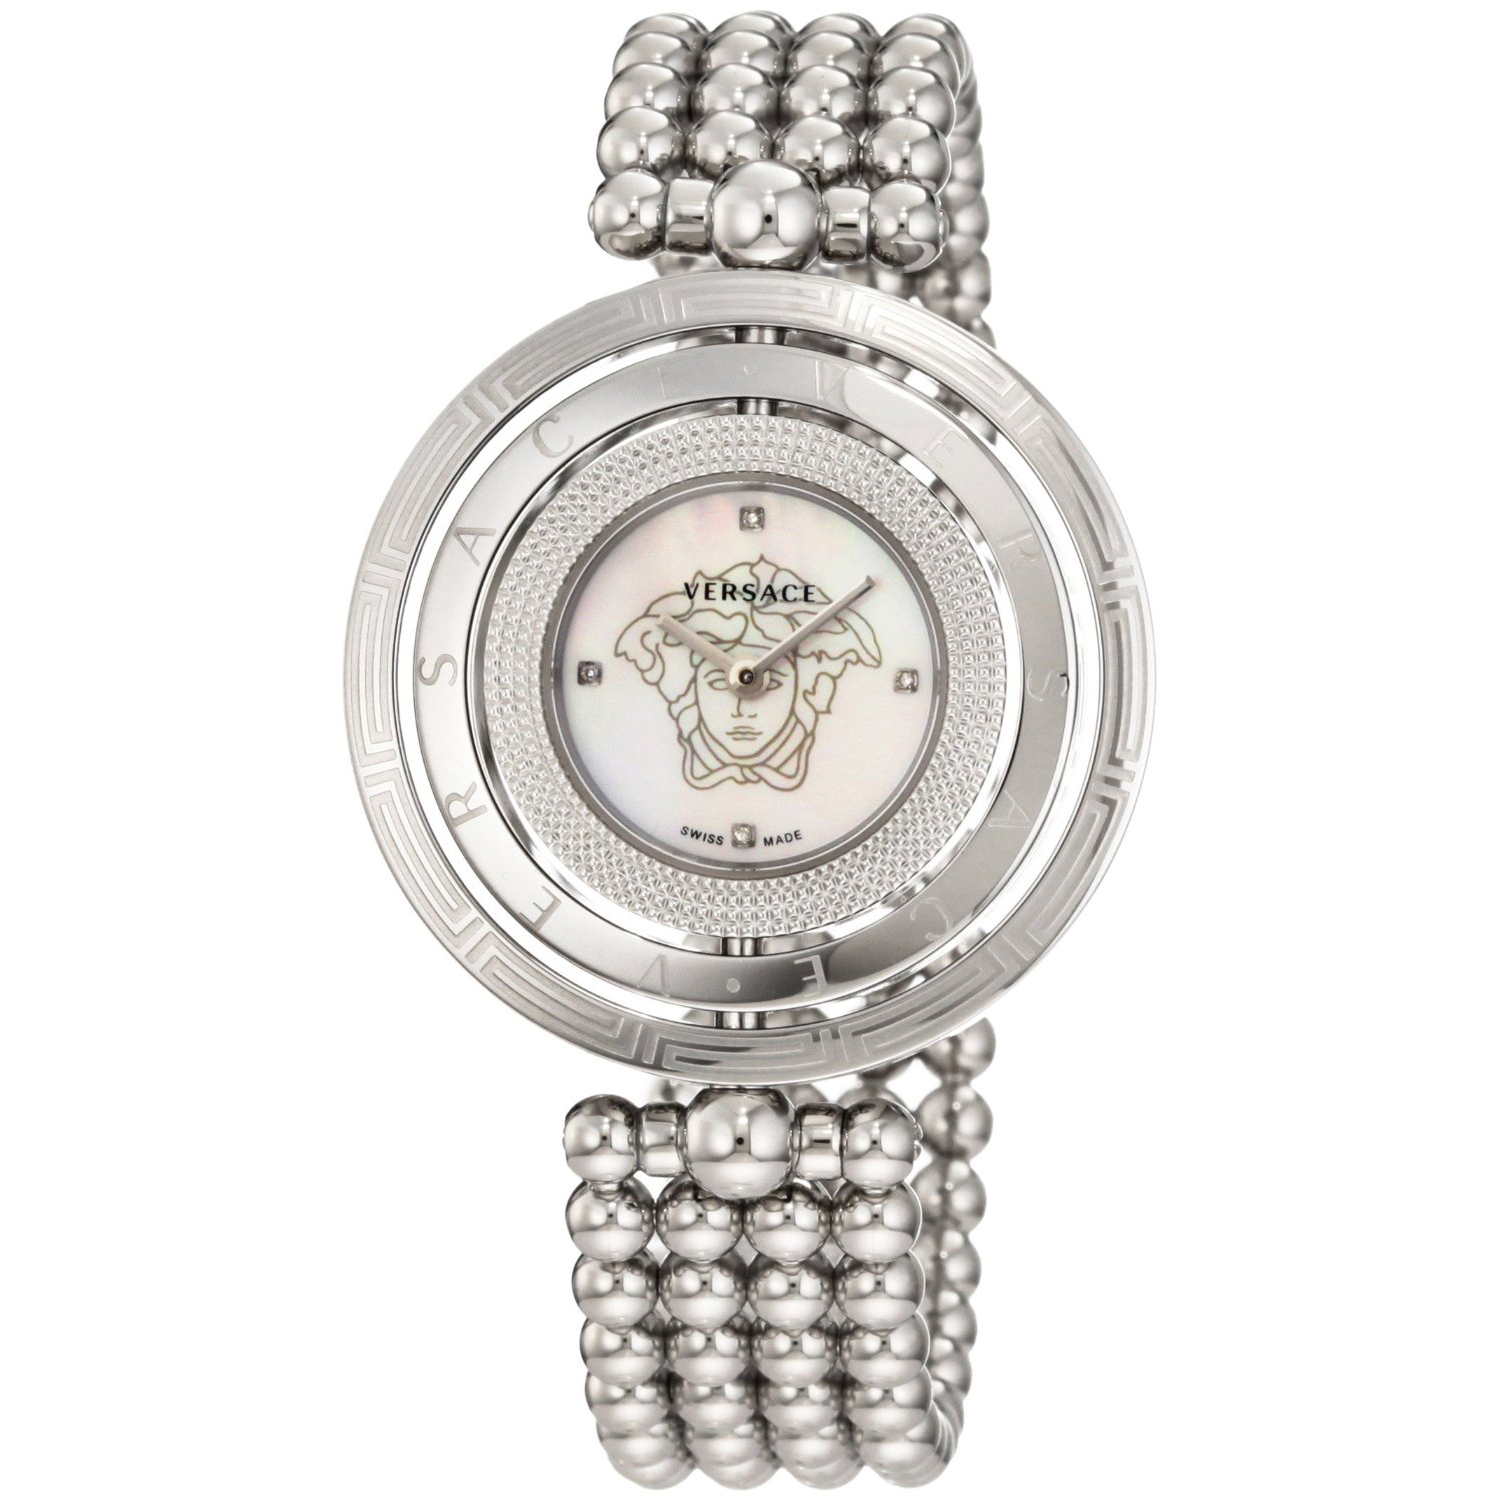 Versace Women's 80Q99SD497 S099 Eon 3 Rings Stainless Steel Bracelet with Mother-of-Pearl Dial and Diamond Accents Watch  $973.76